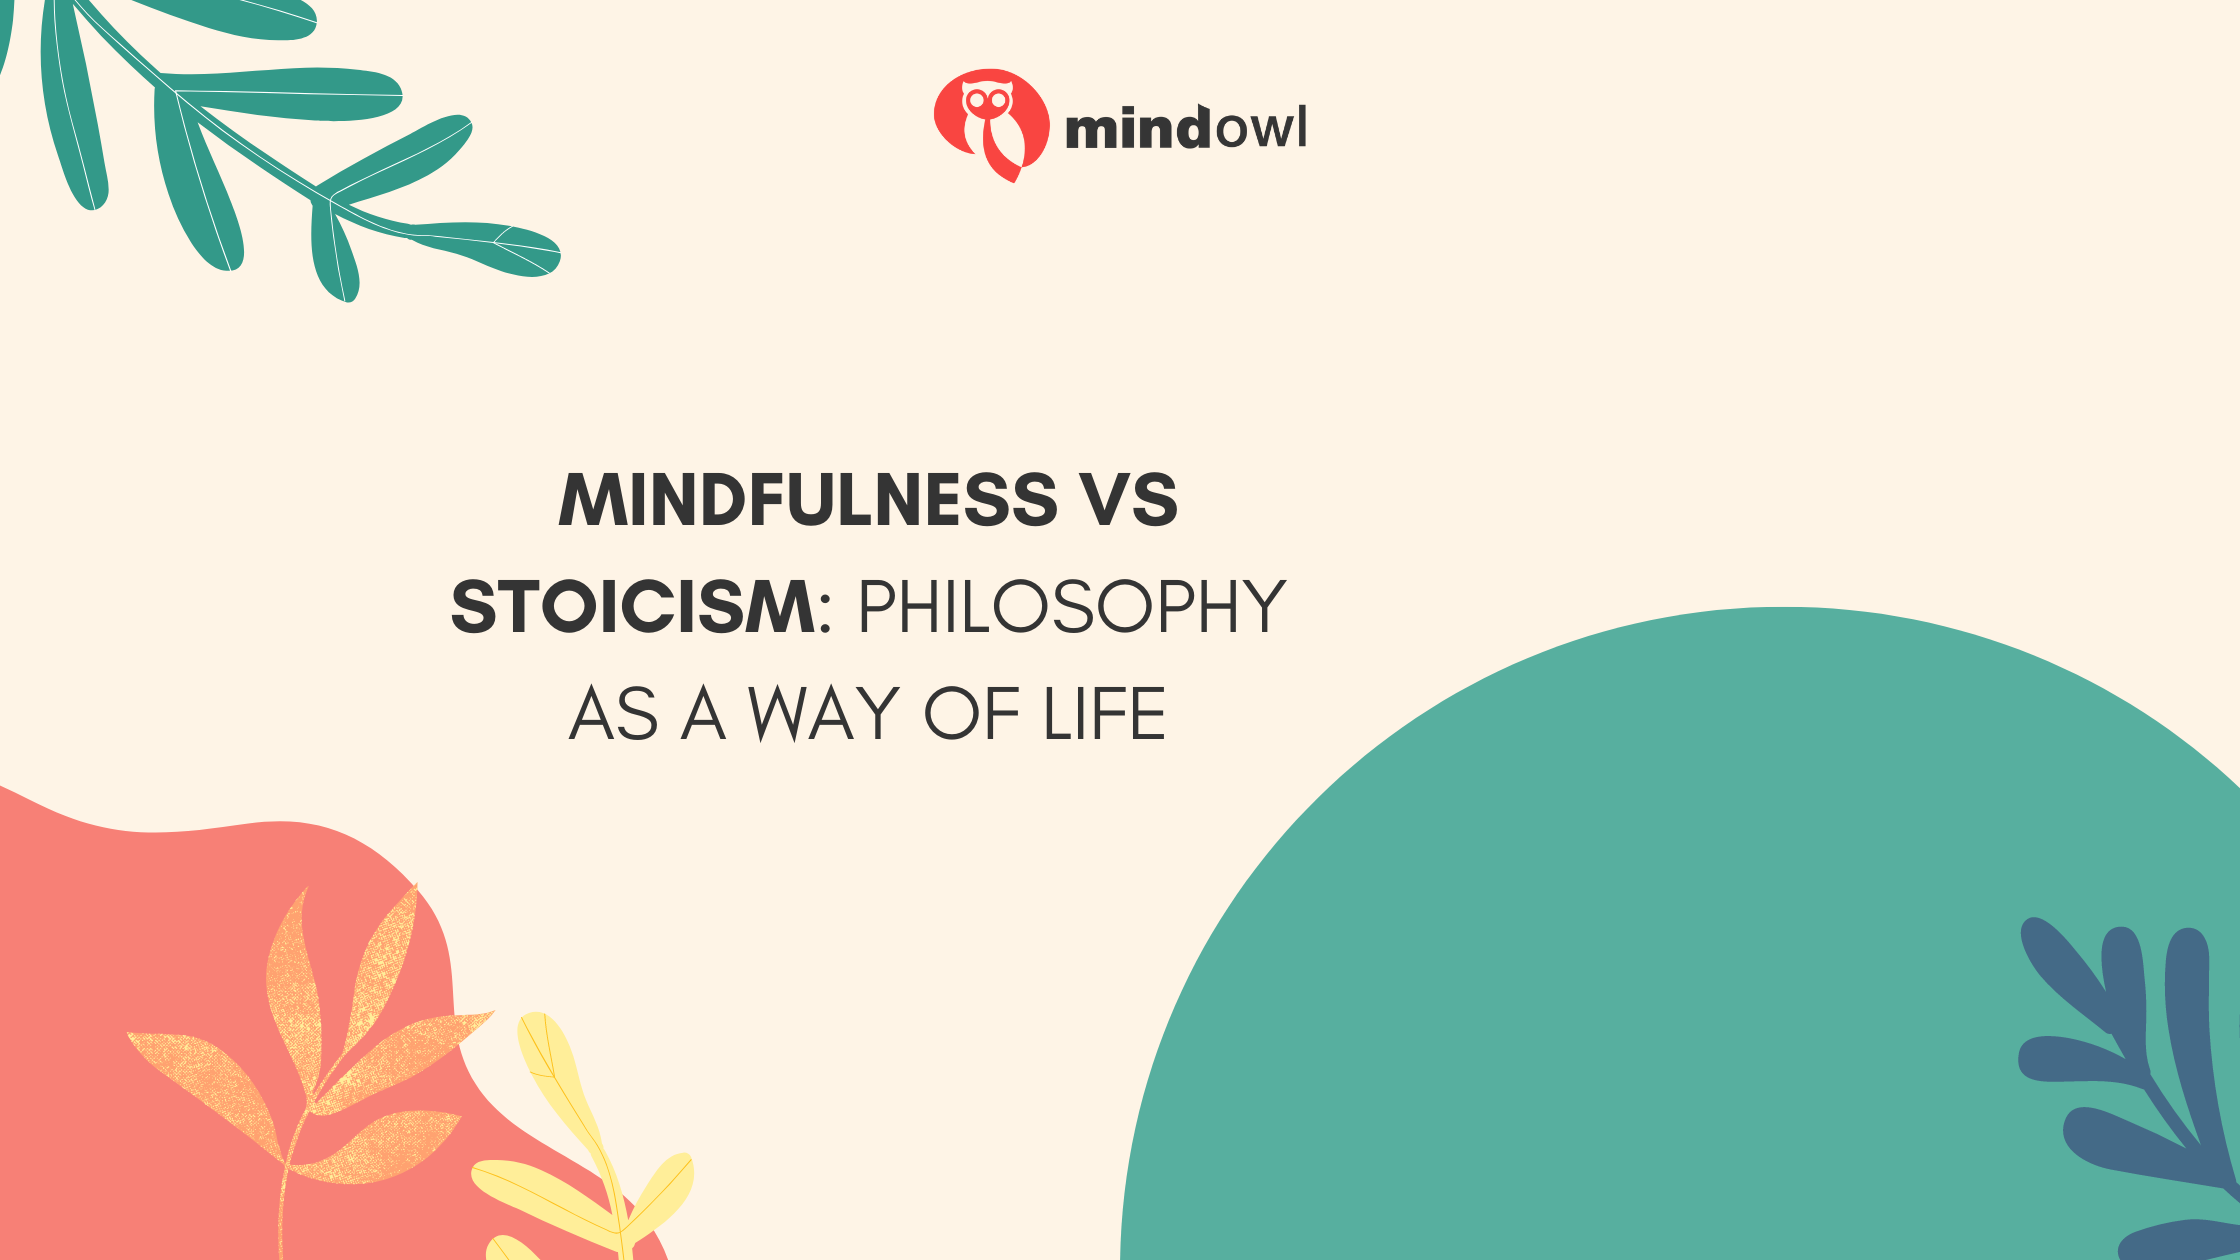 Mindfulness vs Stoicism: Philosophy as a Way of Life